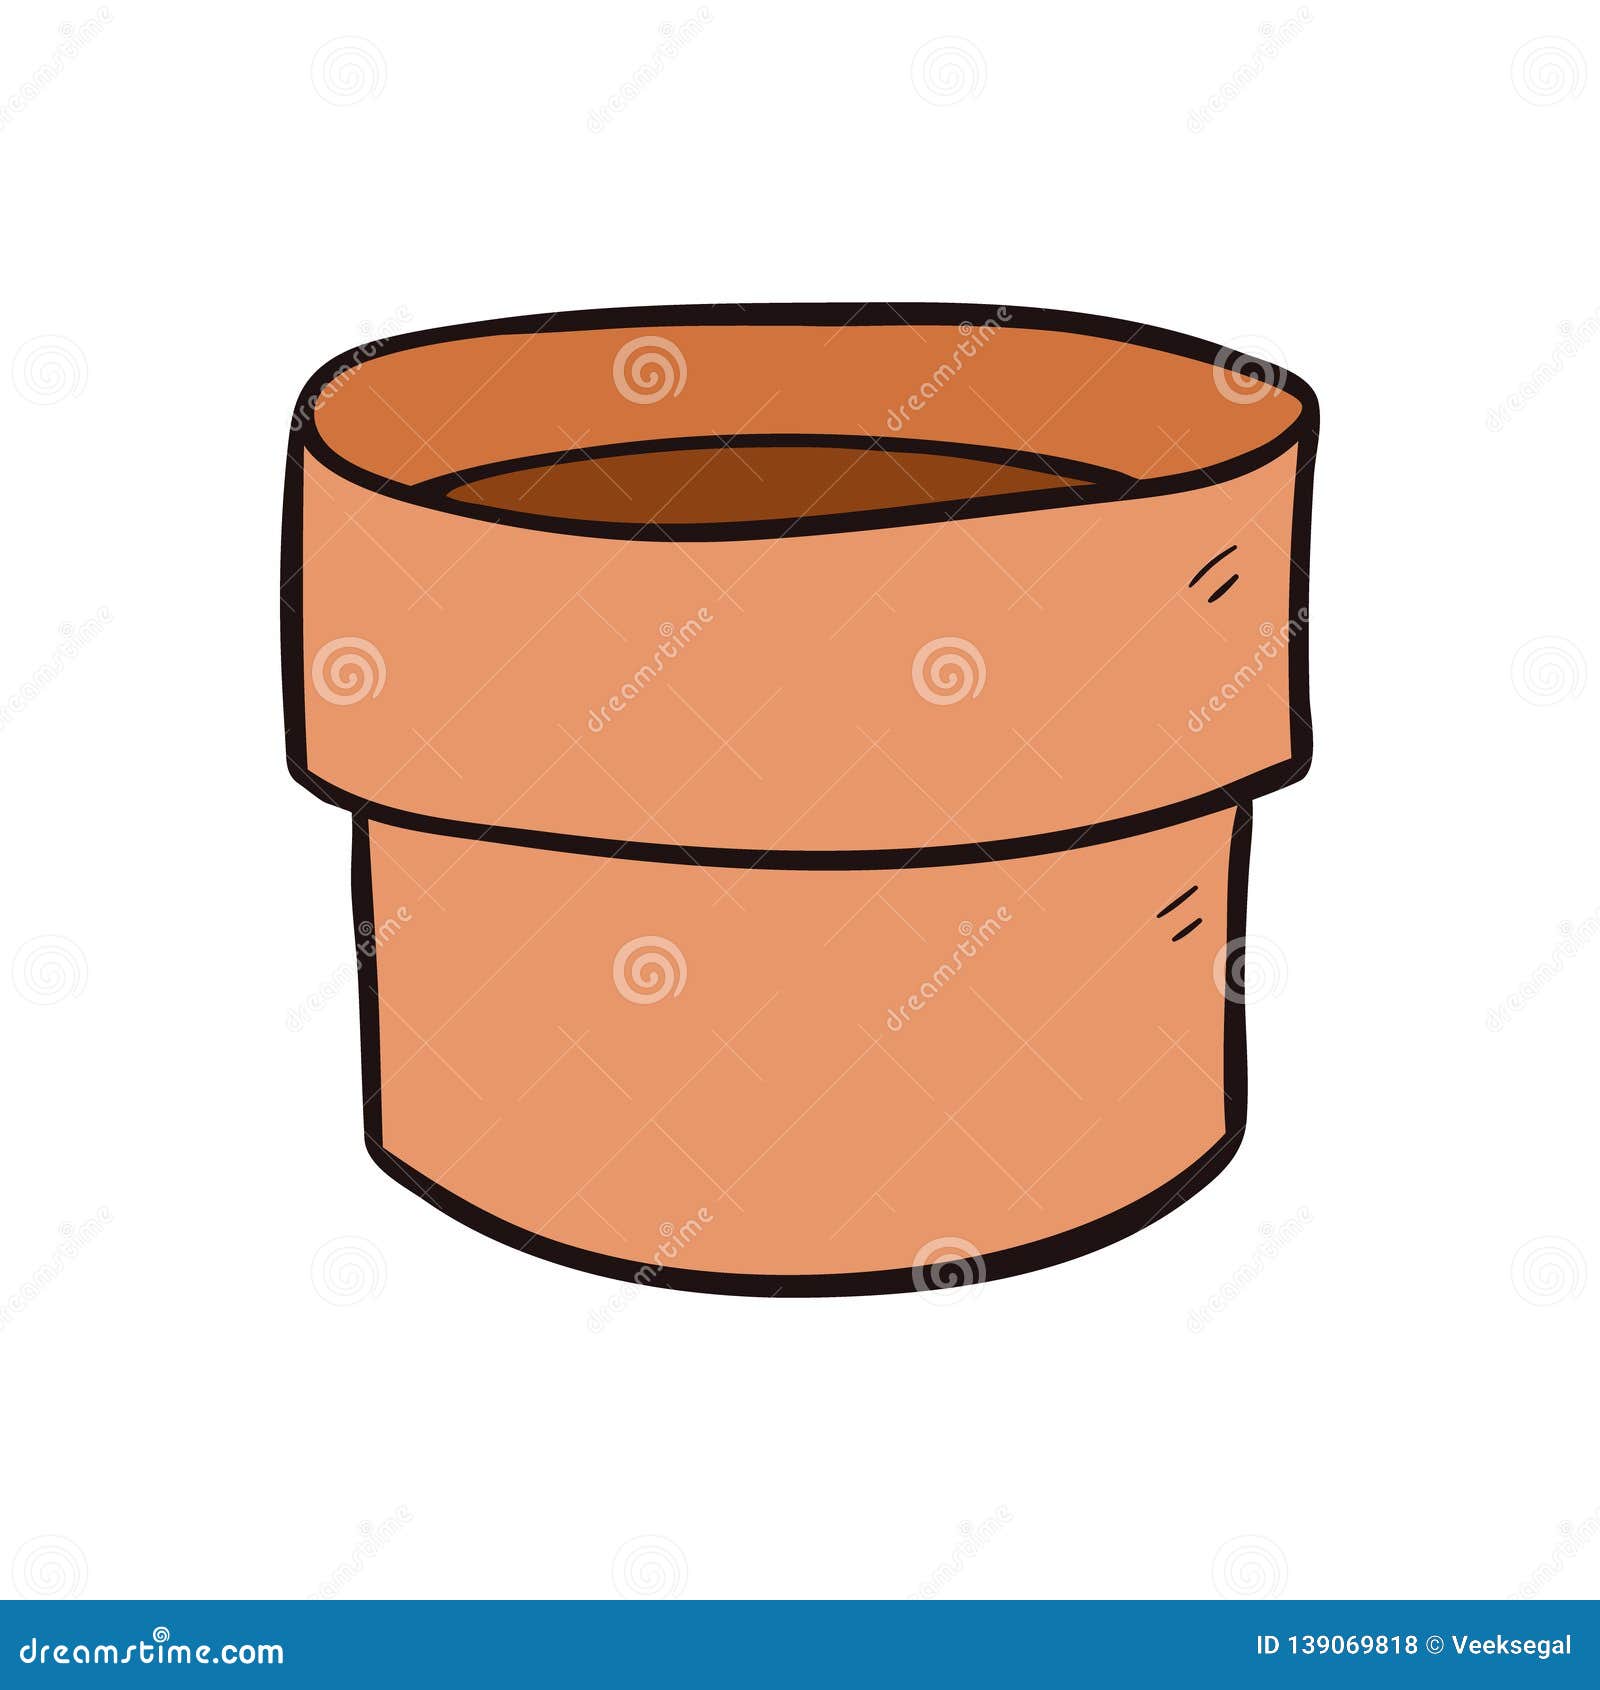 Empty Plant Pot Cartoon Vector and Illustration, Hand Drawn Style, Isolated  on White Background. Stock Vector - Illustration of background, black:  139069818